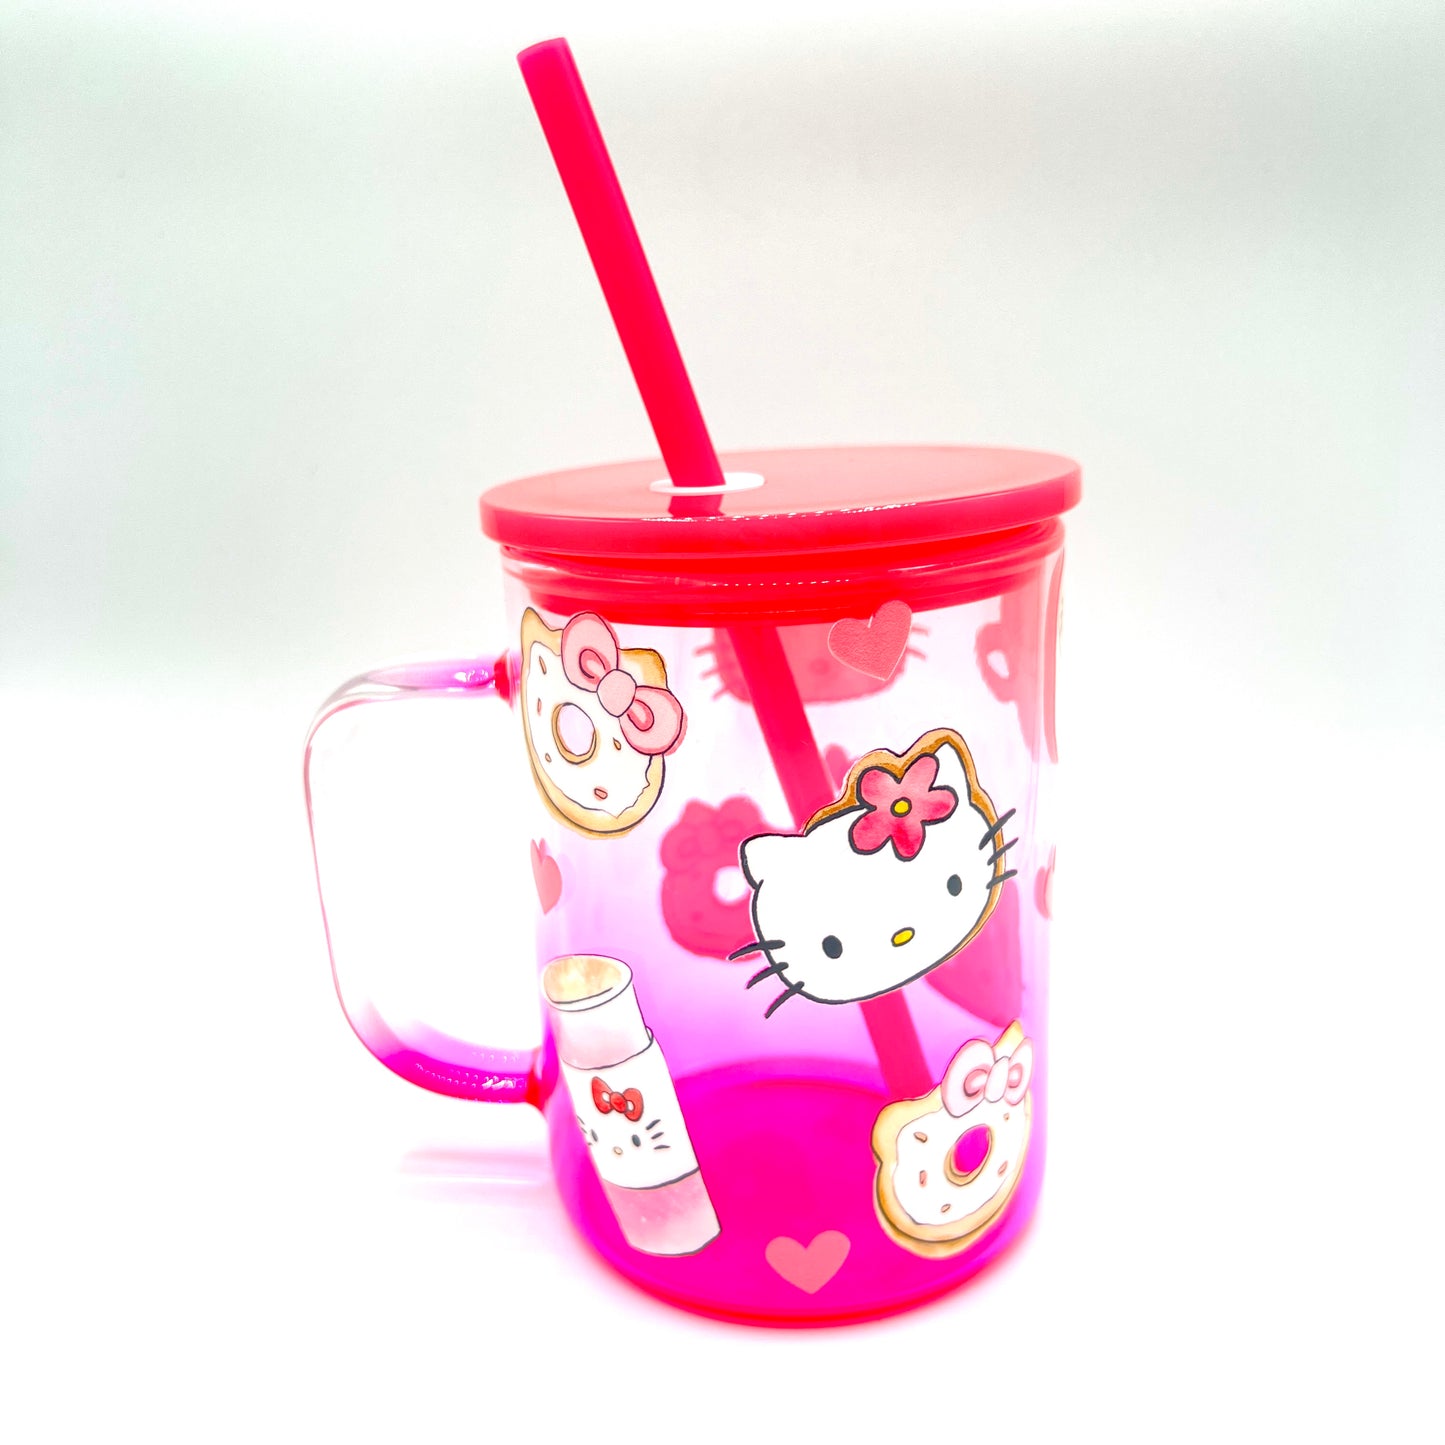 Cat, Coffee and Donut Gradient Mug in Pink